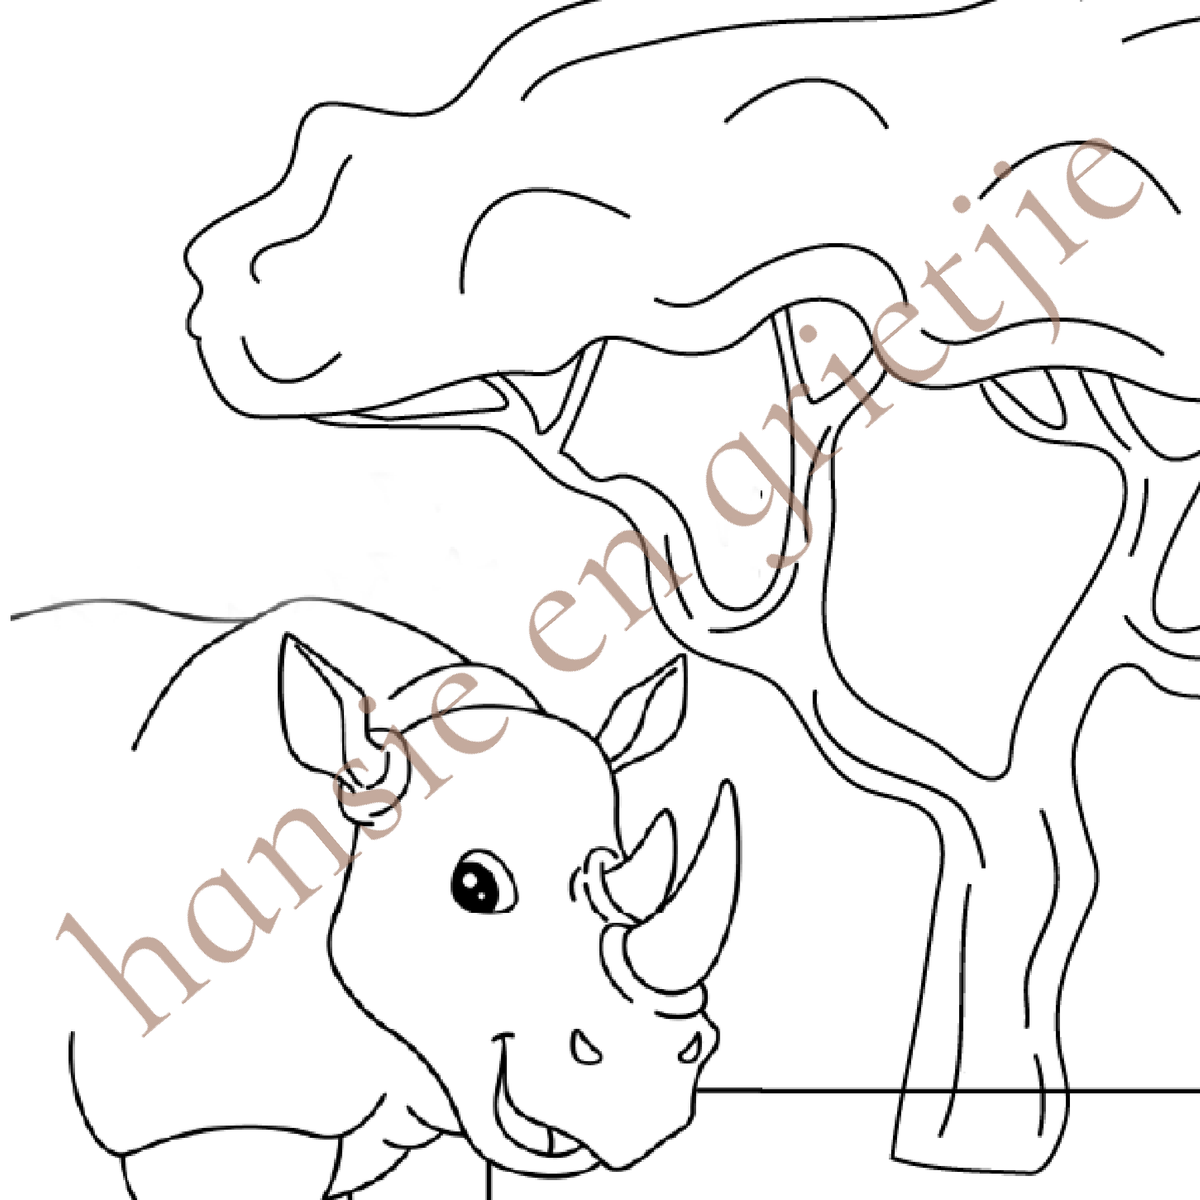 Free Download: Africa's Threatened Species Colouring Book